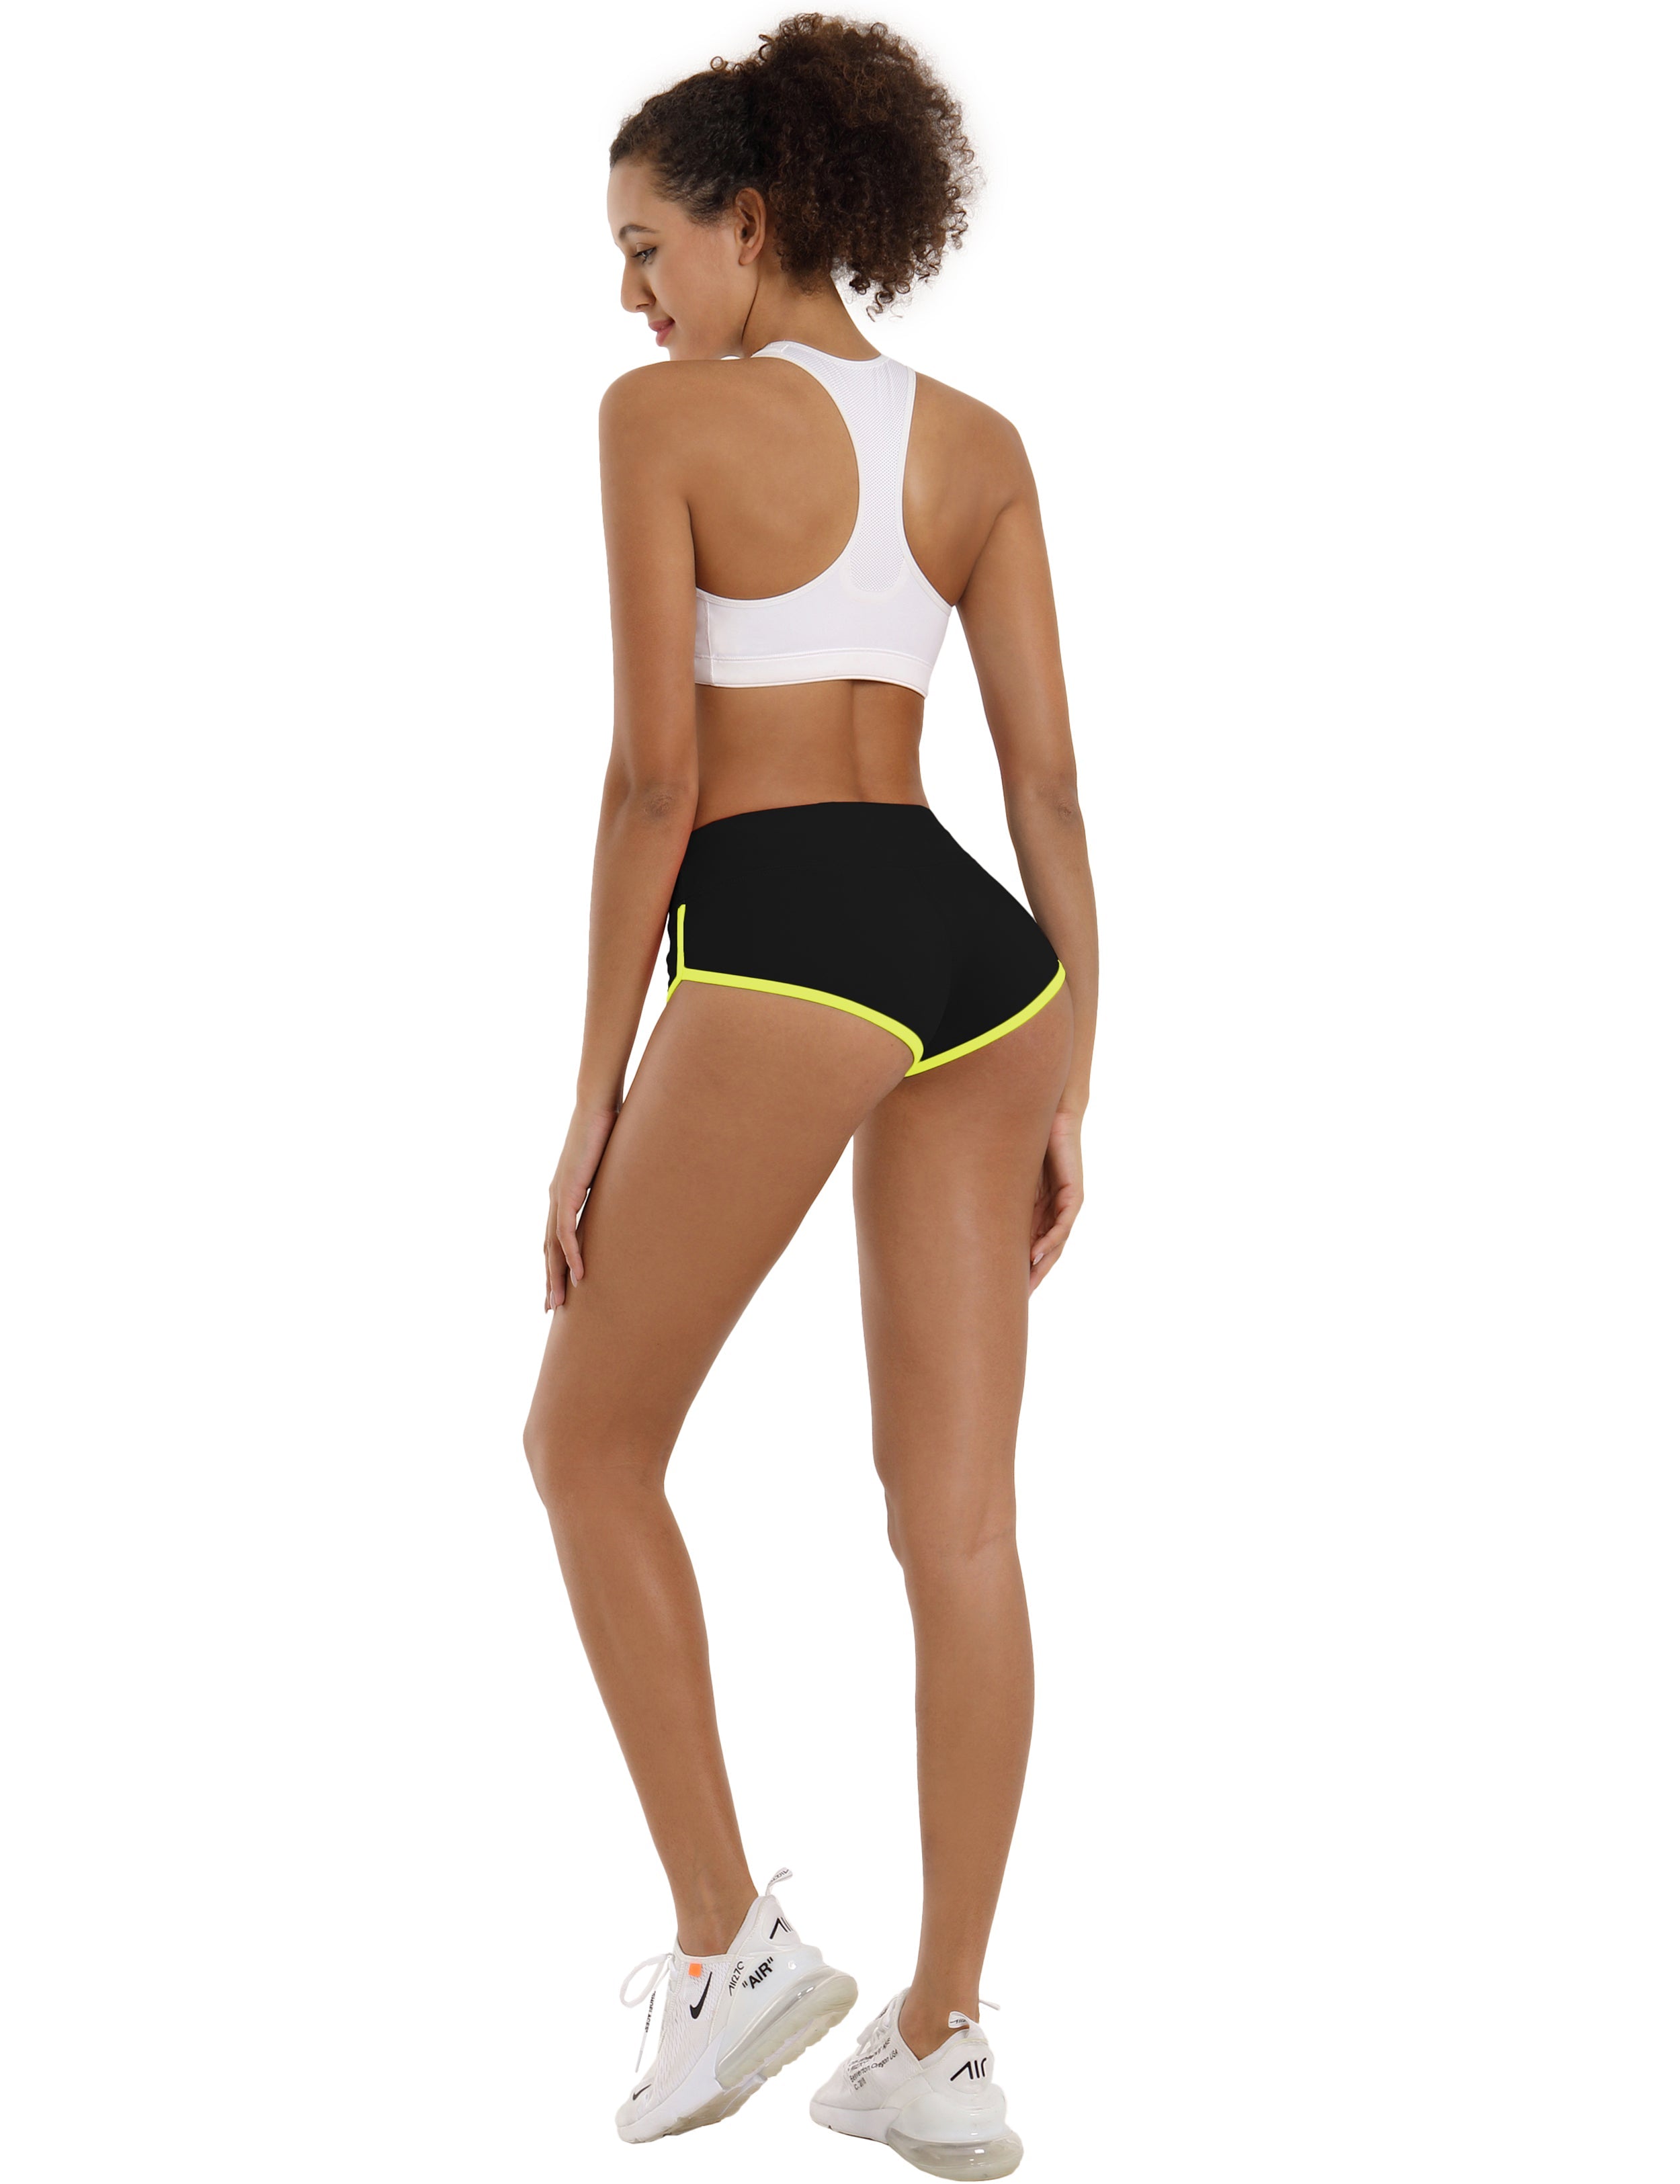 Sexy Booty Biking Shorts black_fluorescentyellow Sleek, soft, smooth and totally comfortable: our newest sexy style is here. Softest-ever fabric High elasticity High density 4-way stretch Fabric doesn't attract lint easily No see-through Moisture-wicking Machine wash 75%Nylon/25%Spandex